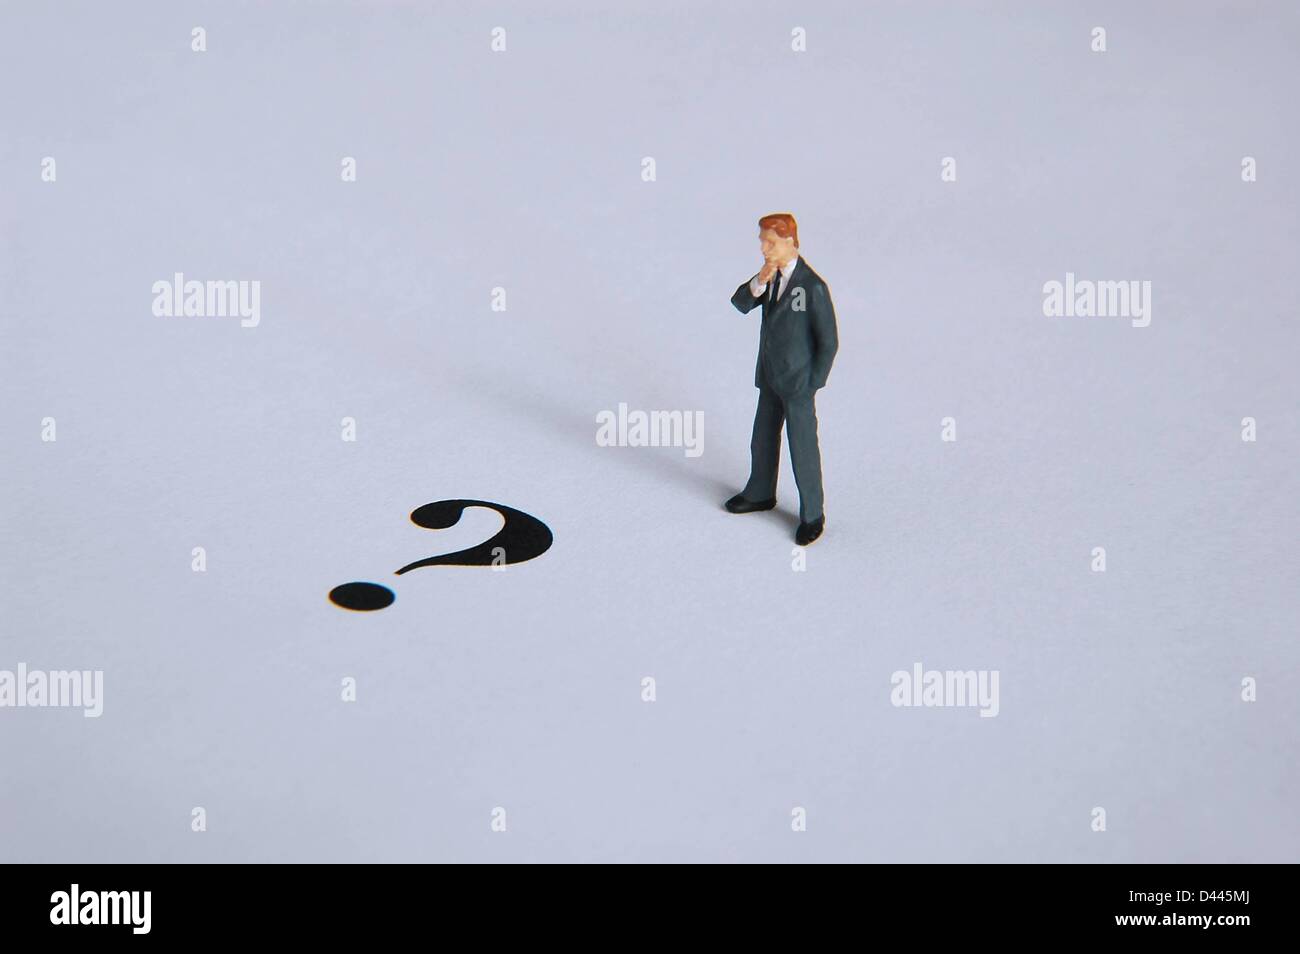 Illustration - A miniature figure in a suit stands in front of a question mark in Berlin, Germany, 5 December 2007. Fotoarchiv für ZeitgeschichteS.Steinach Stock Photo